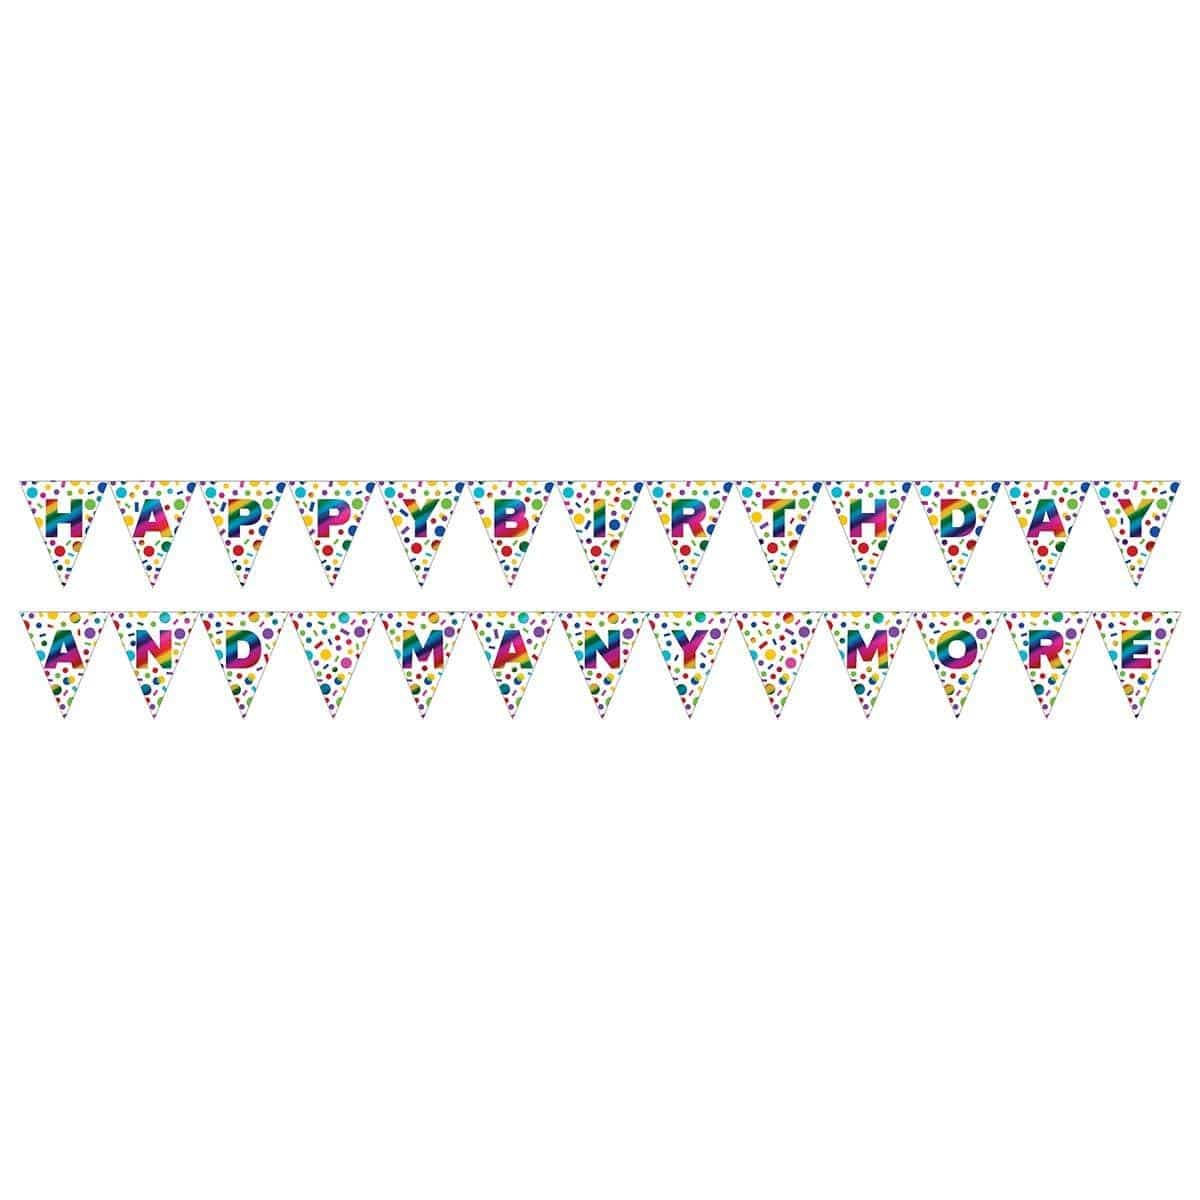 Buy General Birthday Rainbow Foil Birthday - Pennant Banner sold at Party Expert